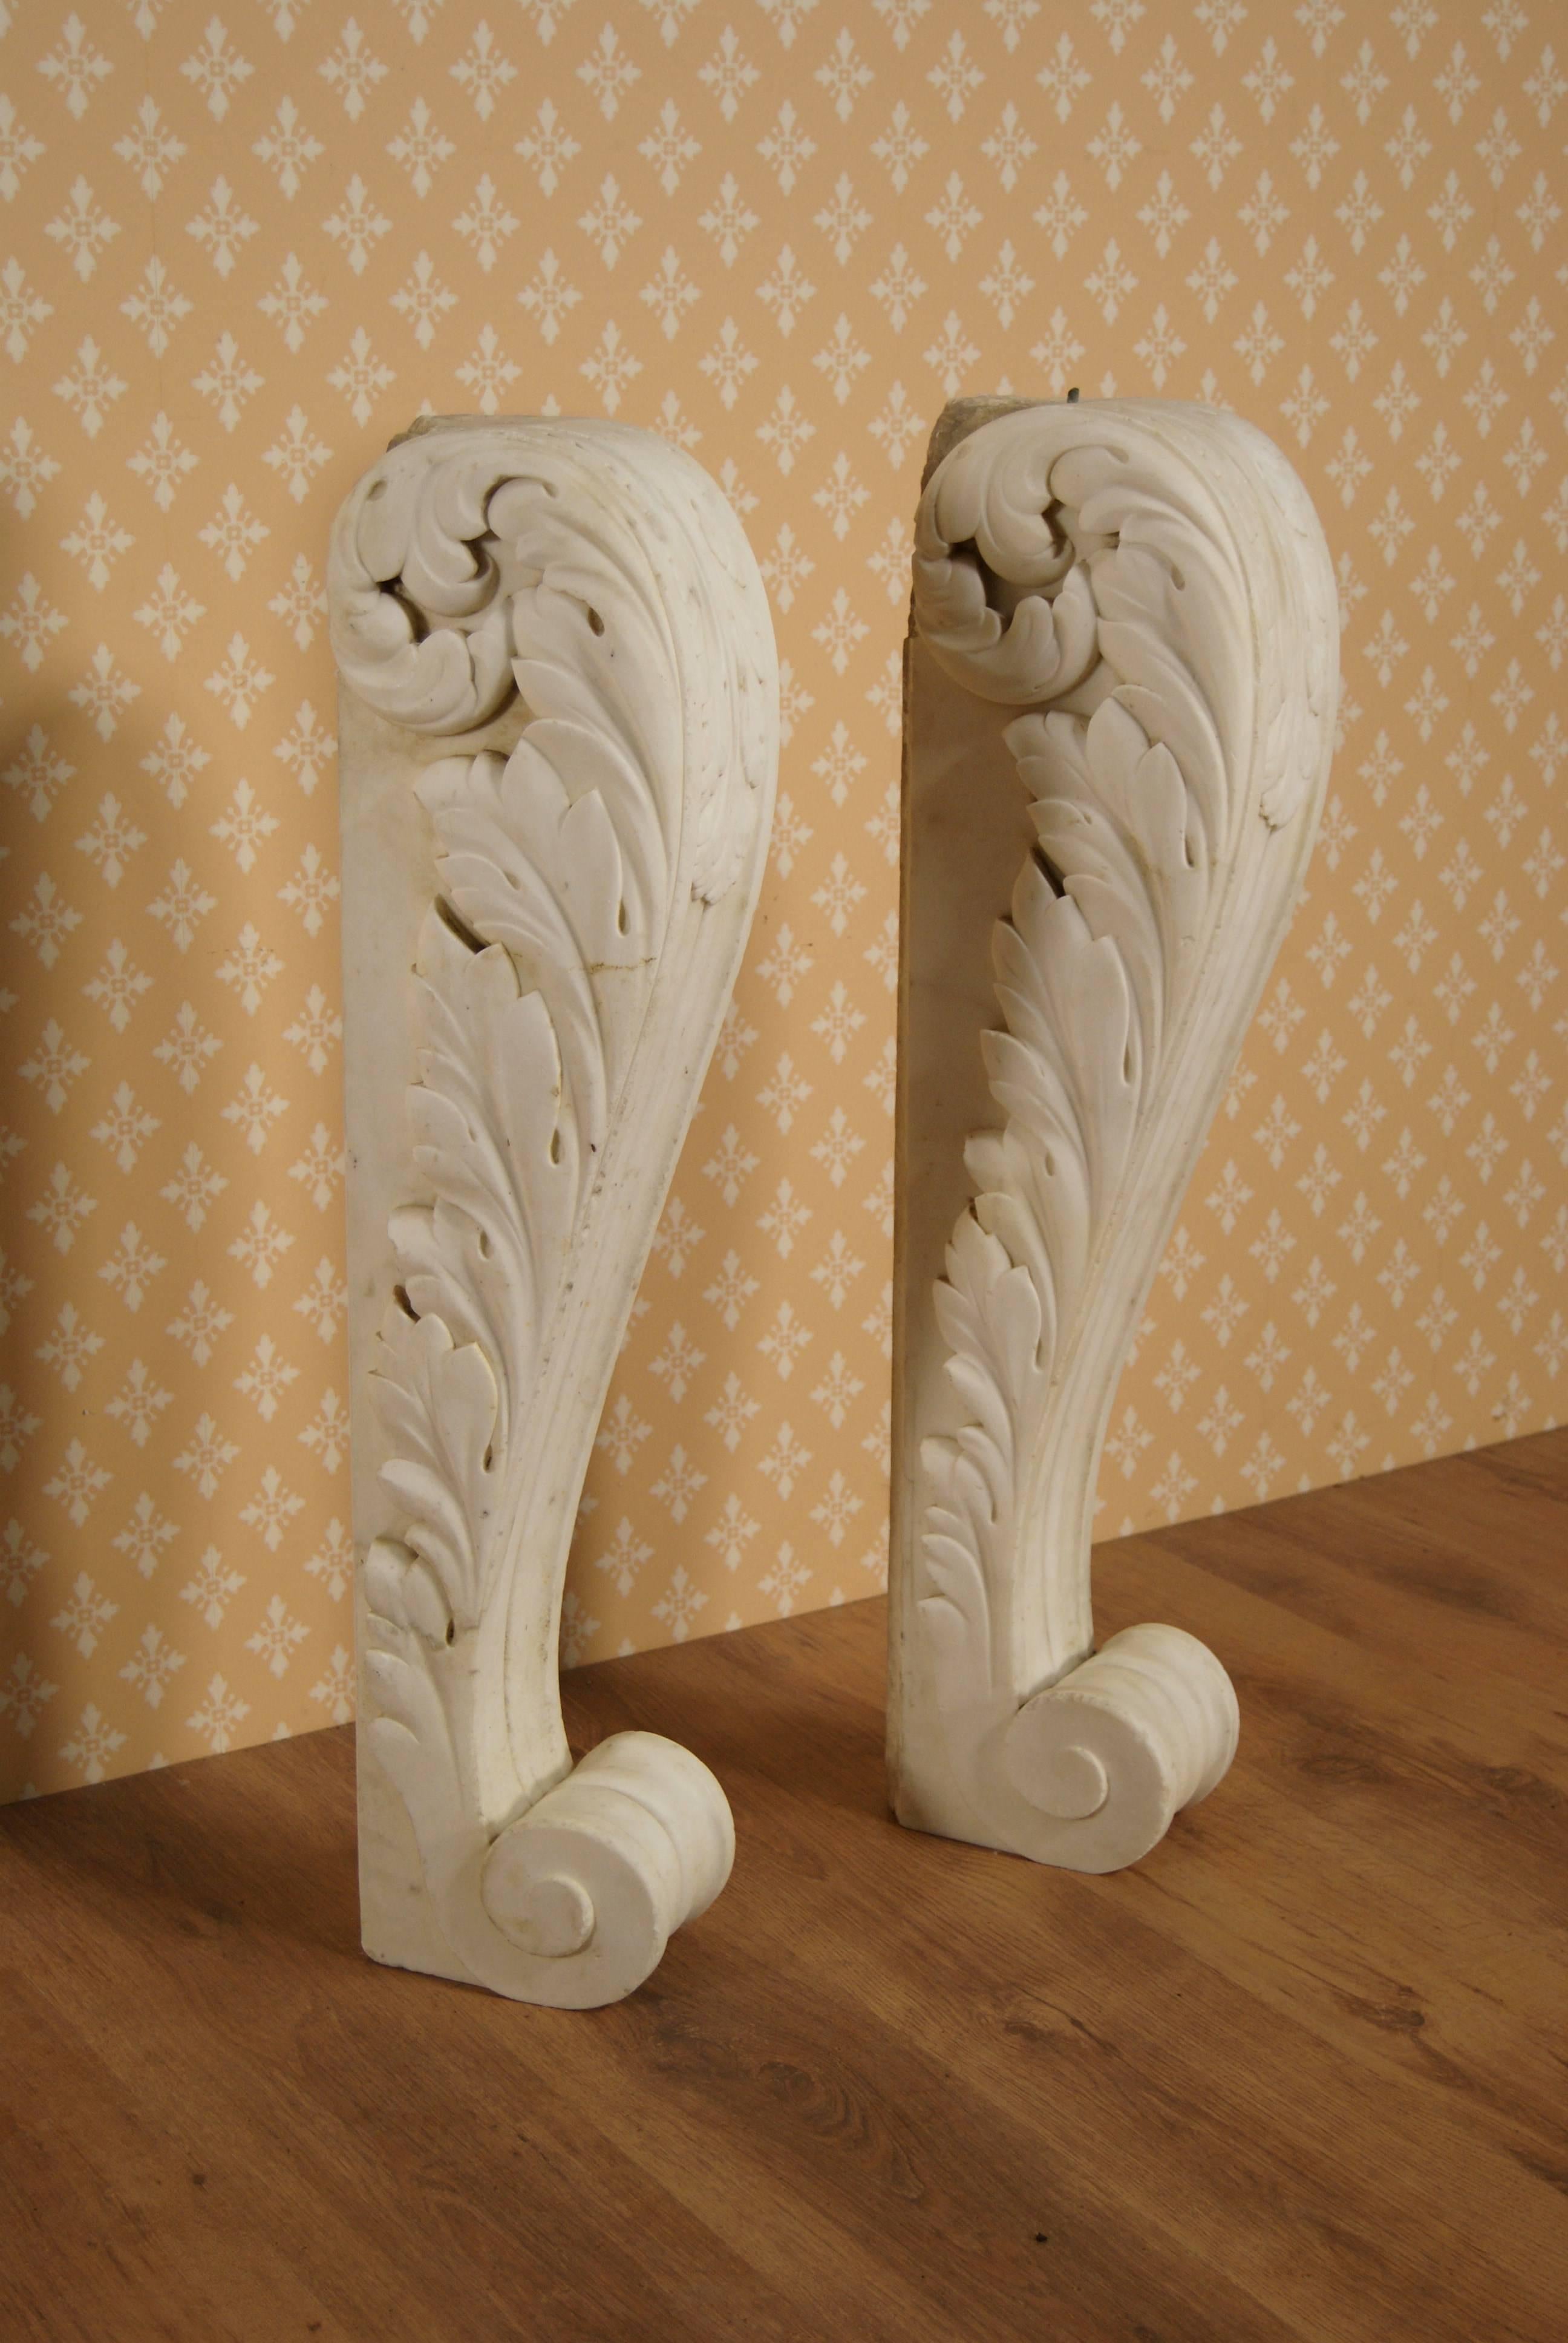 Many decorative uses. These could also be incorporated into a console table.
    